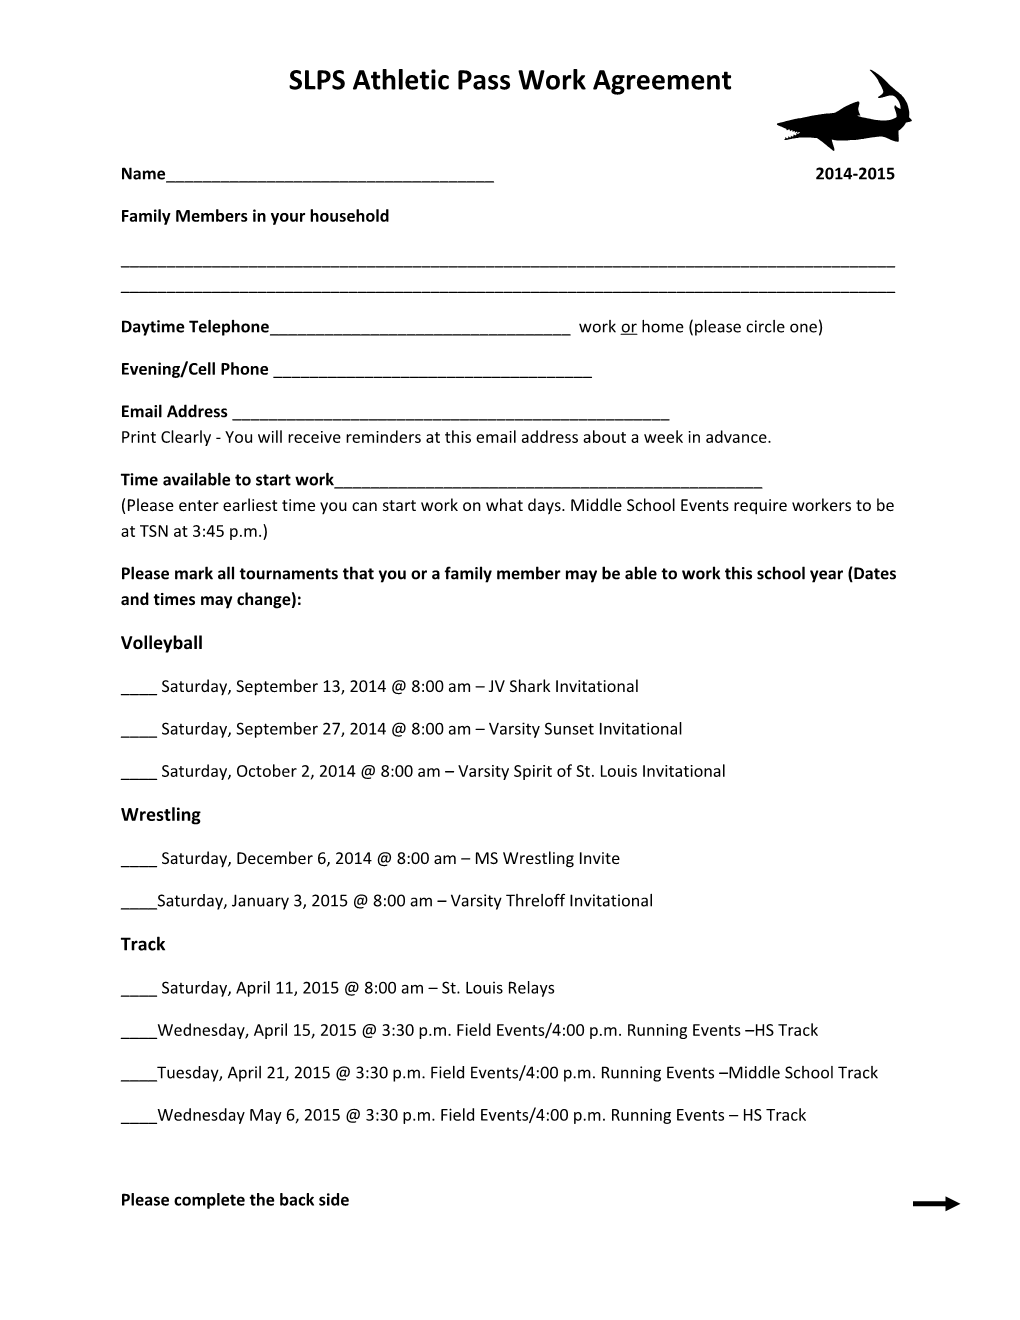 SLPS Athletic Pass Work Agreement